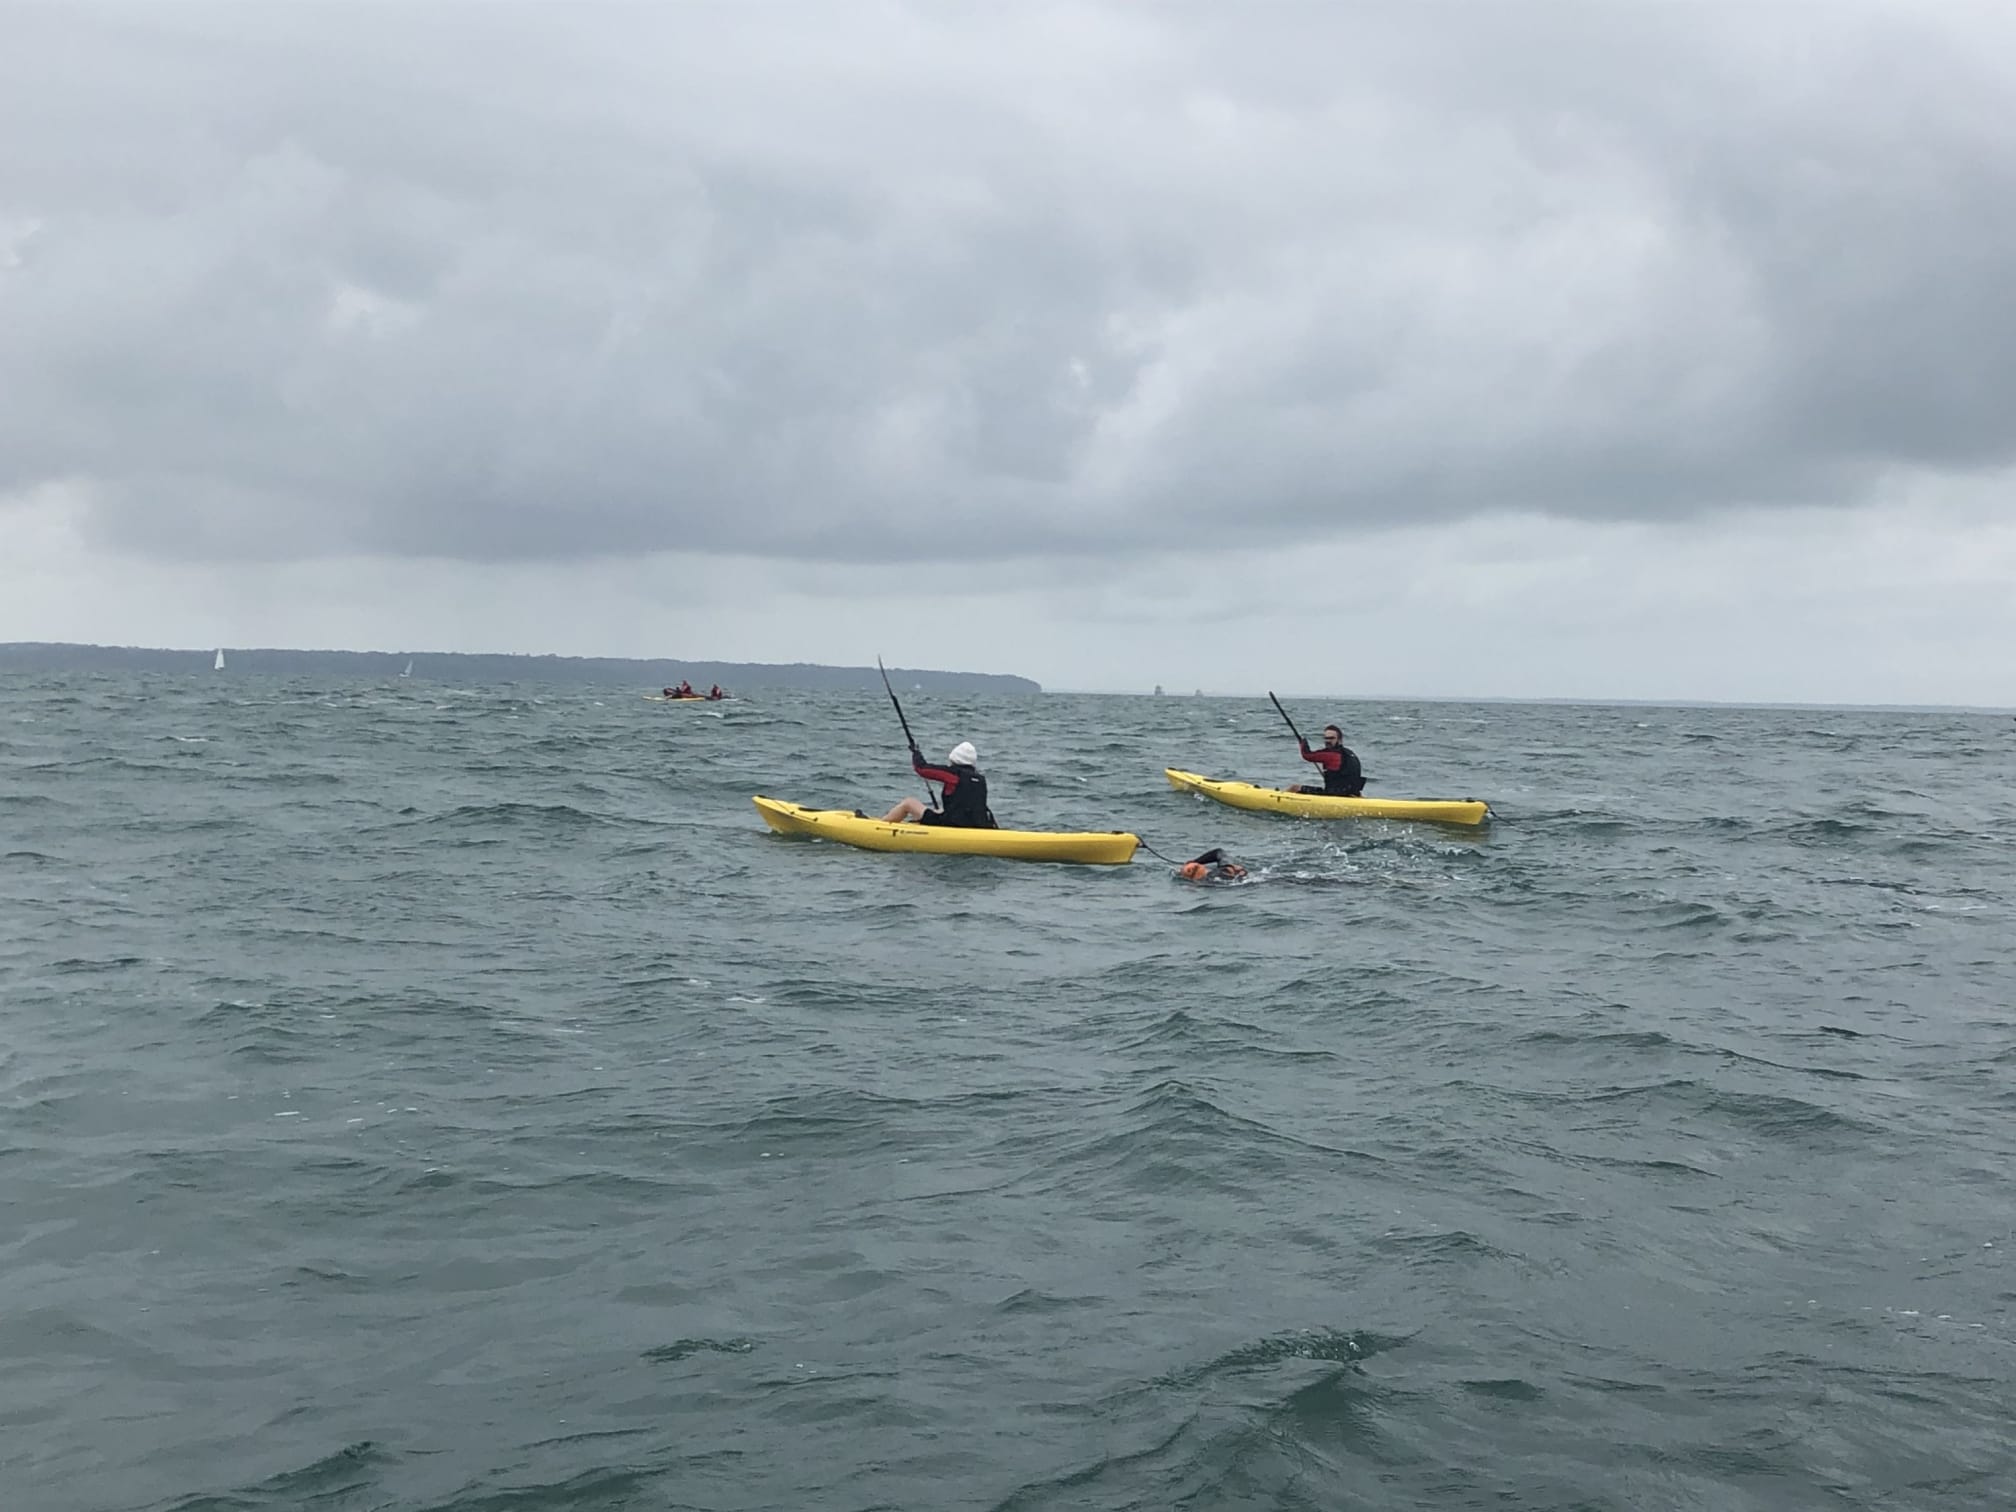 Billy swimming with a kayaker in front and another alongside